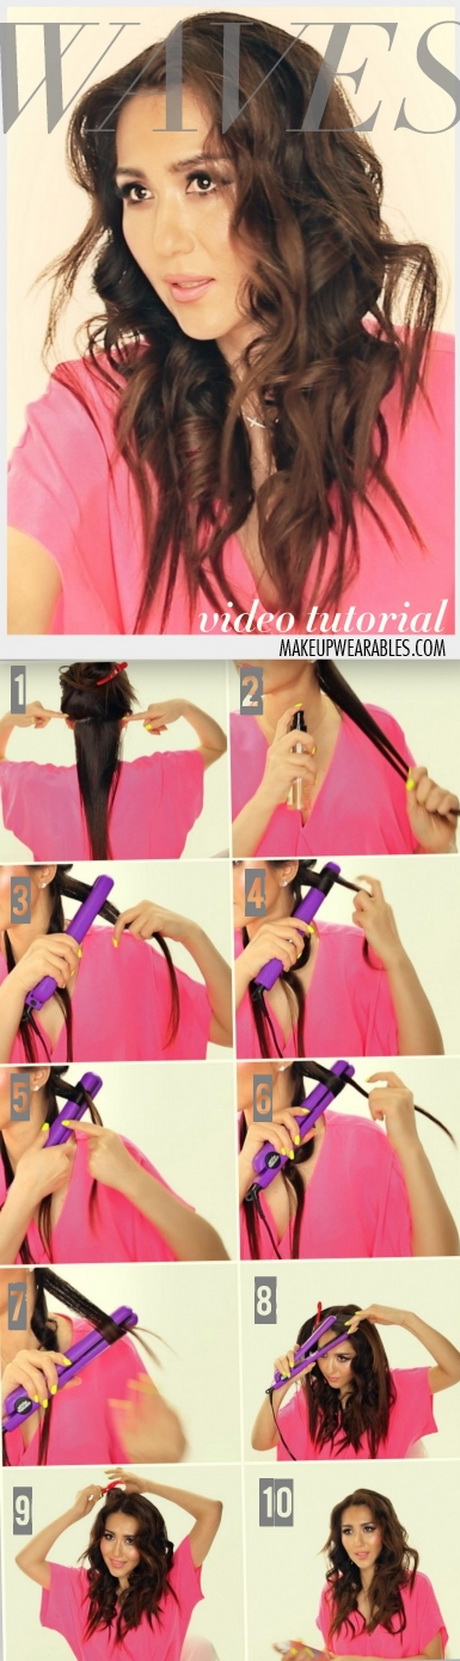 hairstyles-you-can-do-with-a-straightener-04_10 Hairstyles you can do with a straightener